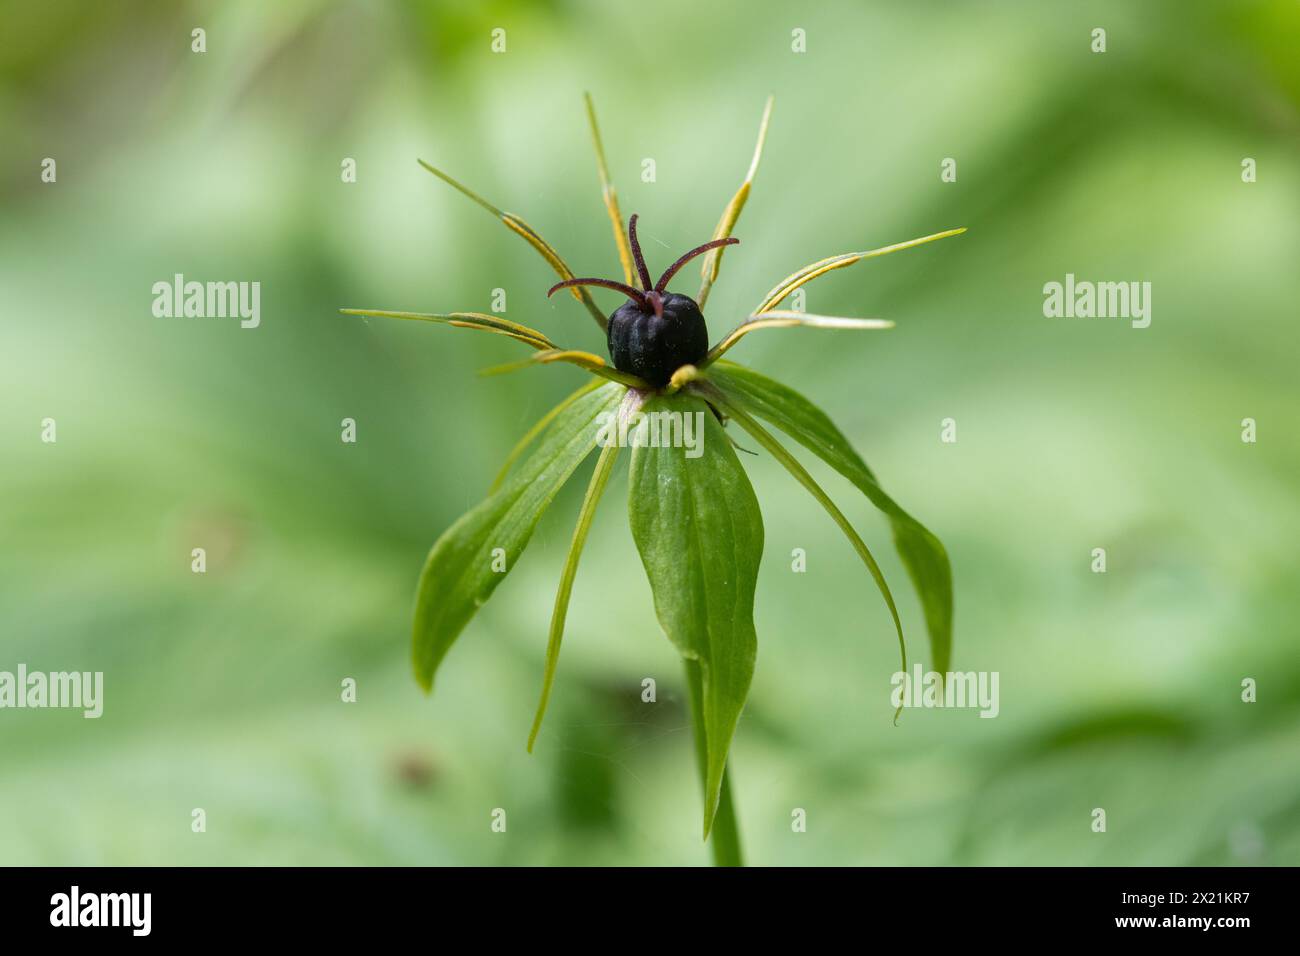 Herb paris (Paris quadrifolia), close-up showing the single yellowish green flower with the fruit, a berry-like black capsule, England, UK Stock Photo